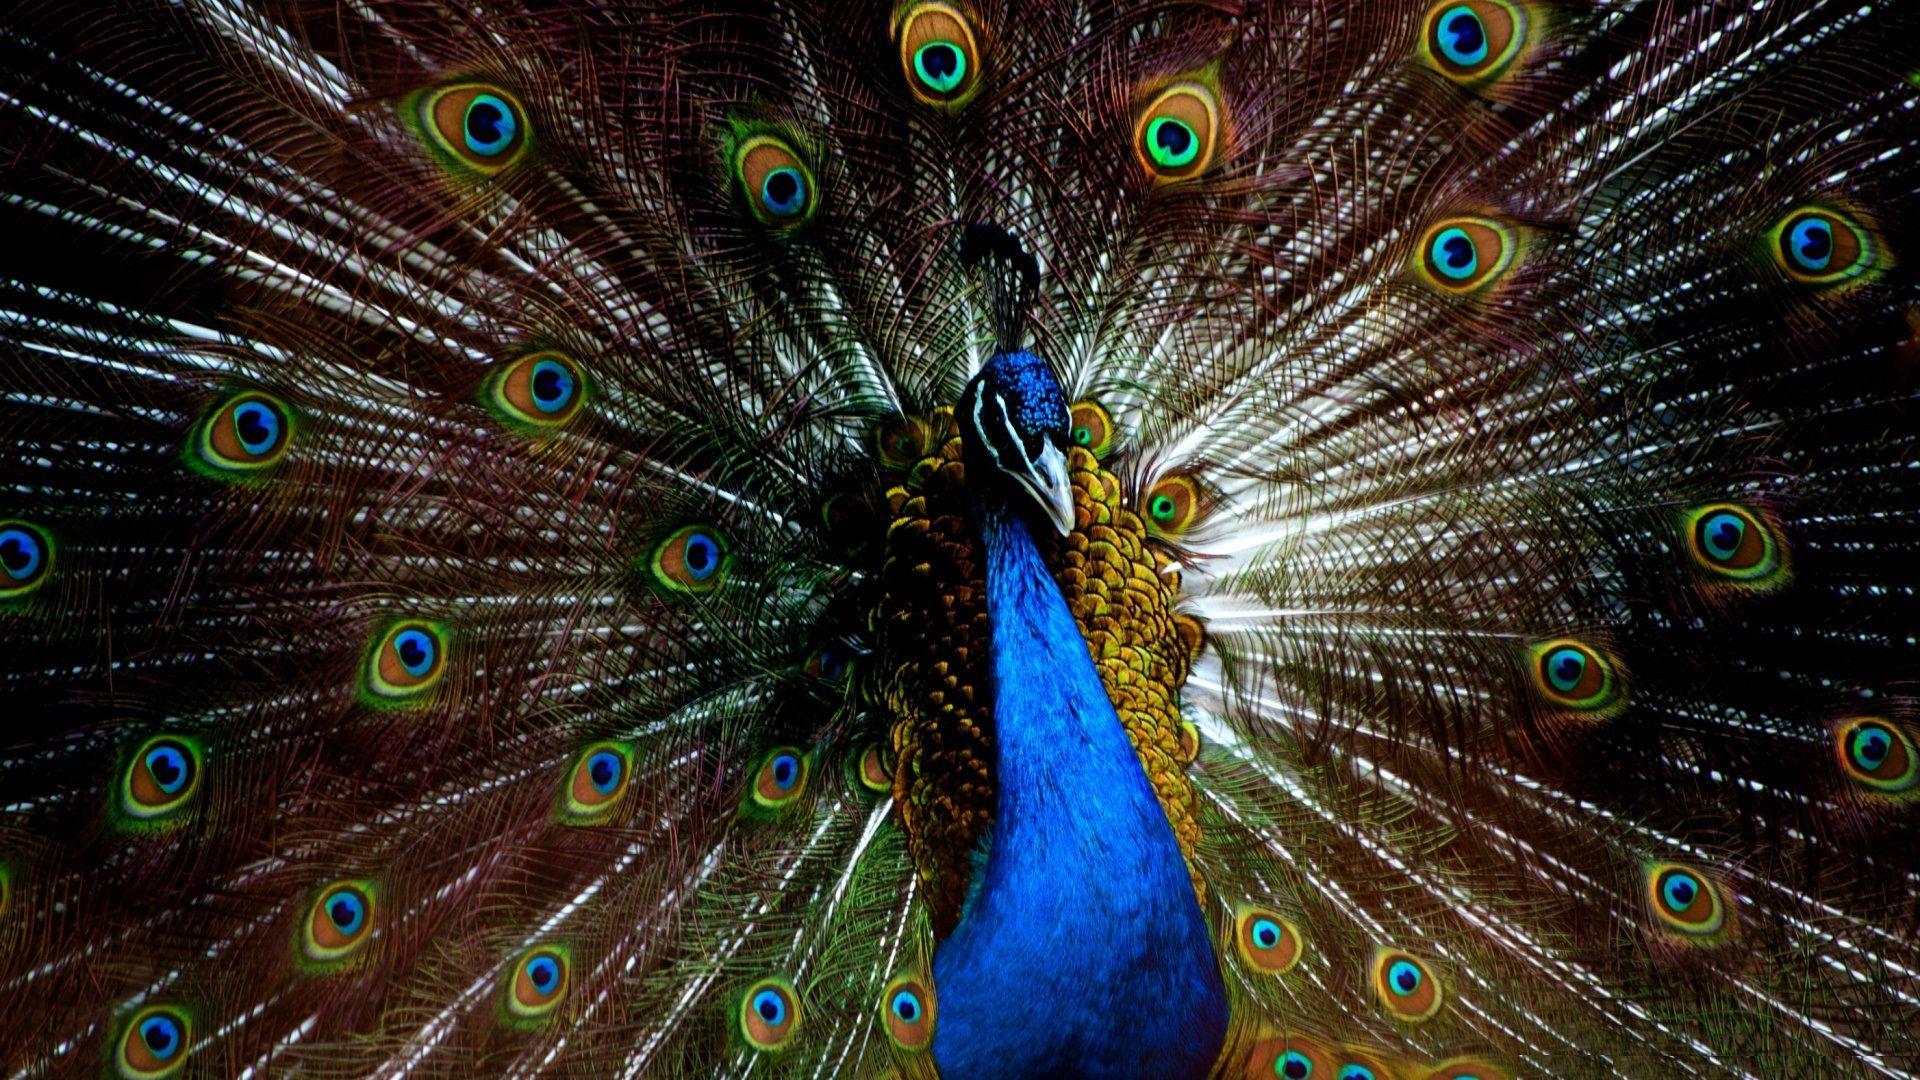 Peacock Feathers HD Image